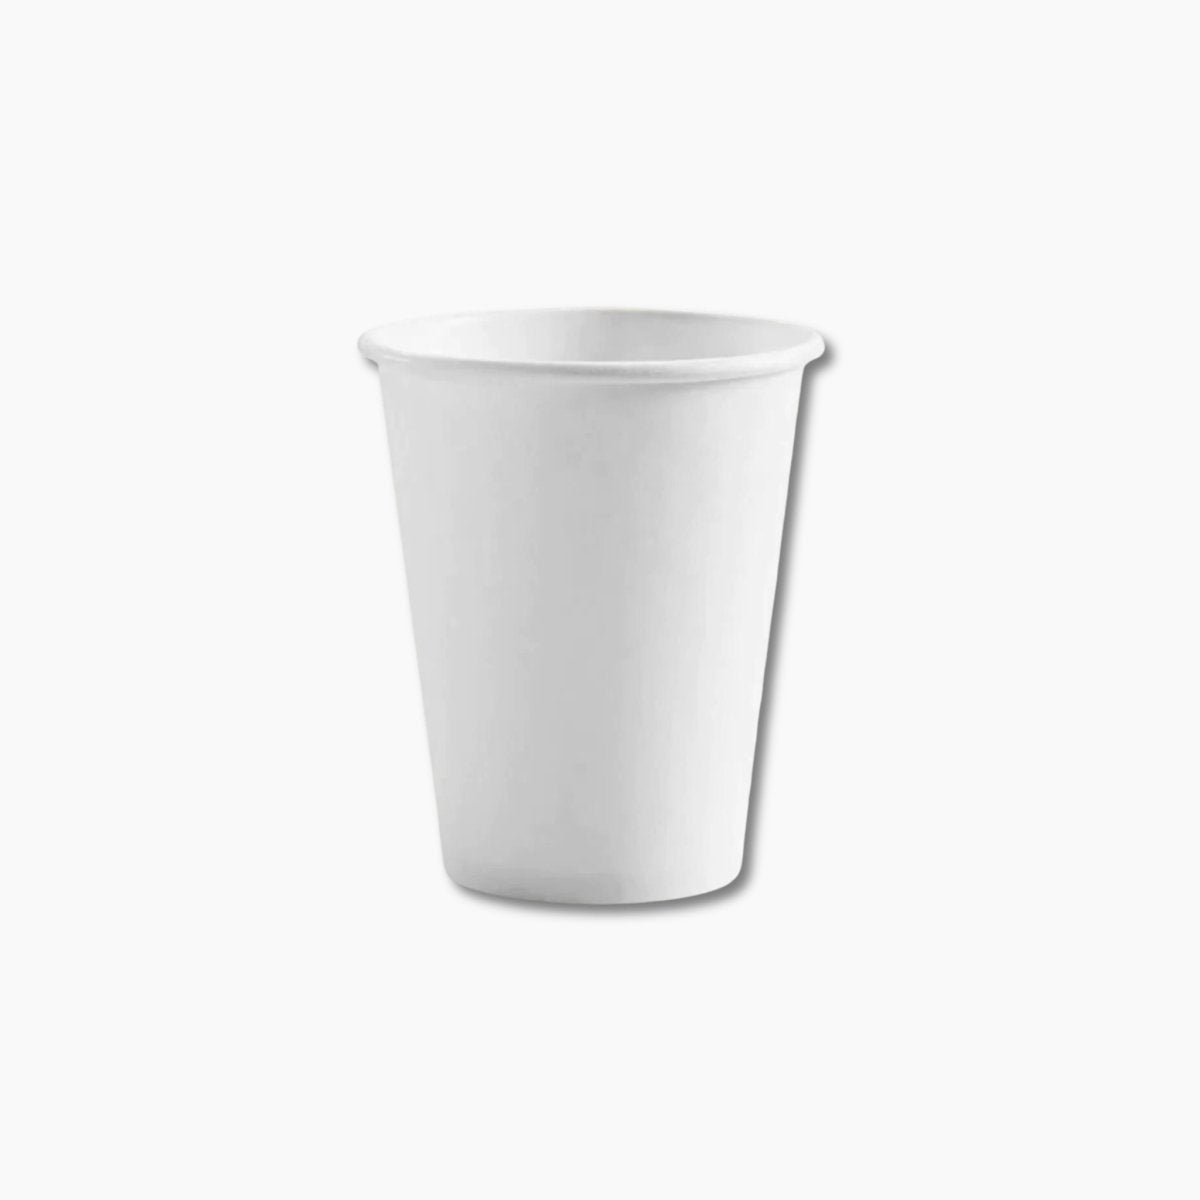 8oz White Coffee Cup - 80mm